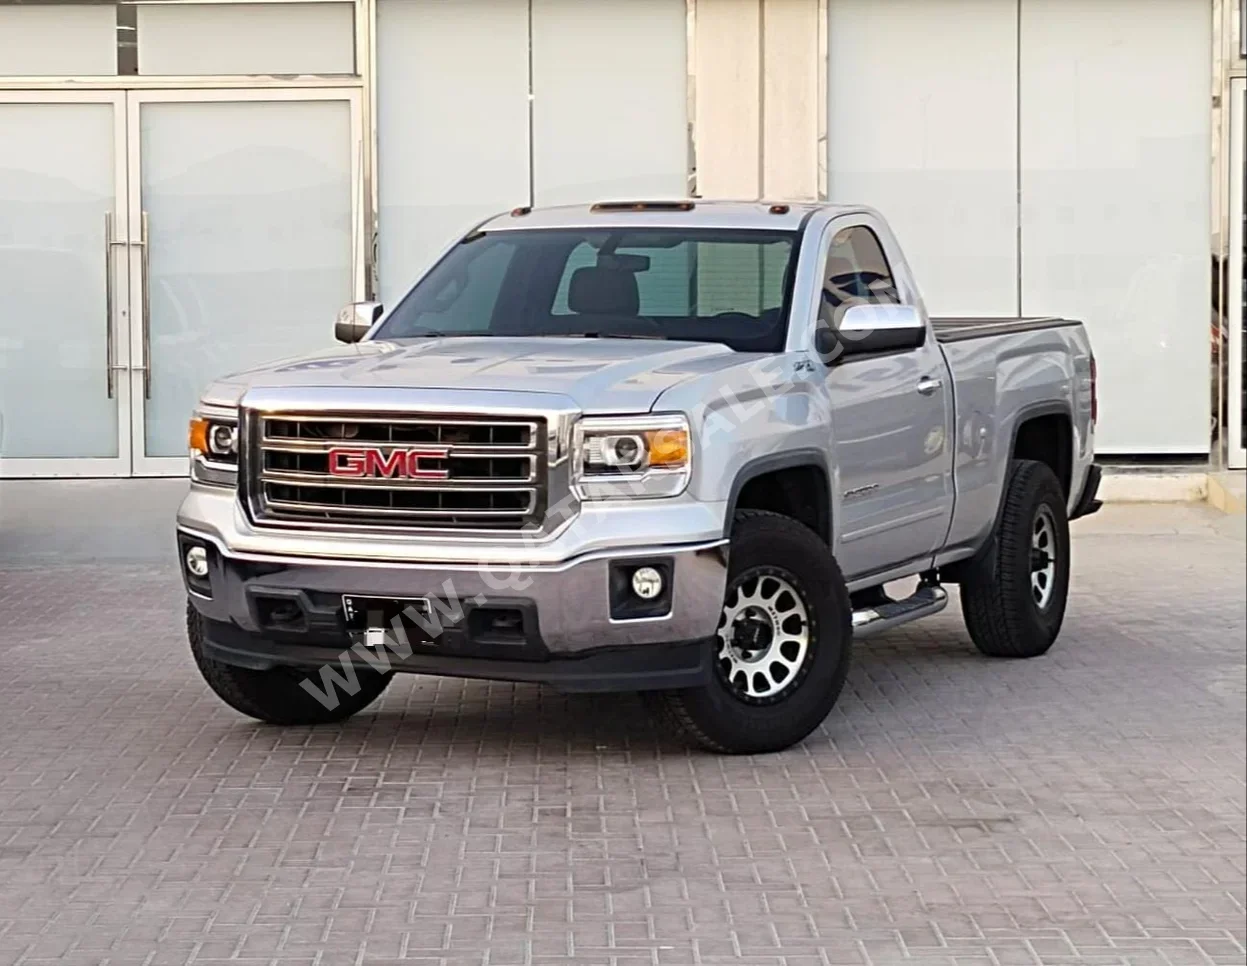 GMC  Sierra  SLE  2015  Automatic  154,000 Km  8 Cylinder  Four Wheel Drive (4WD)  Pick Up  Silver